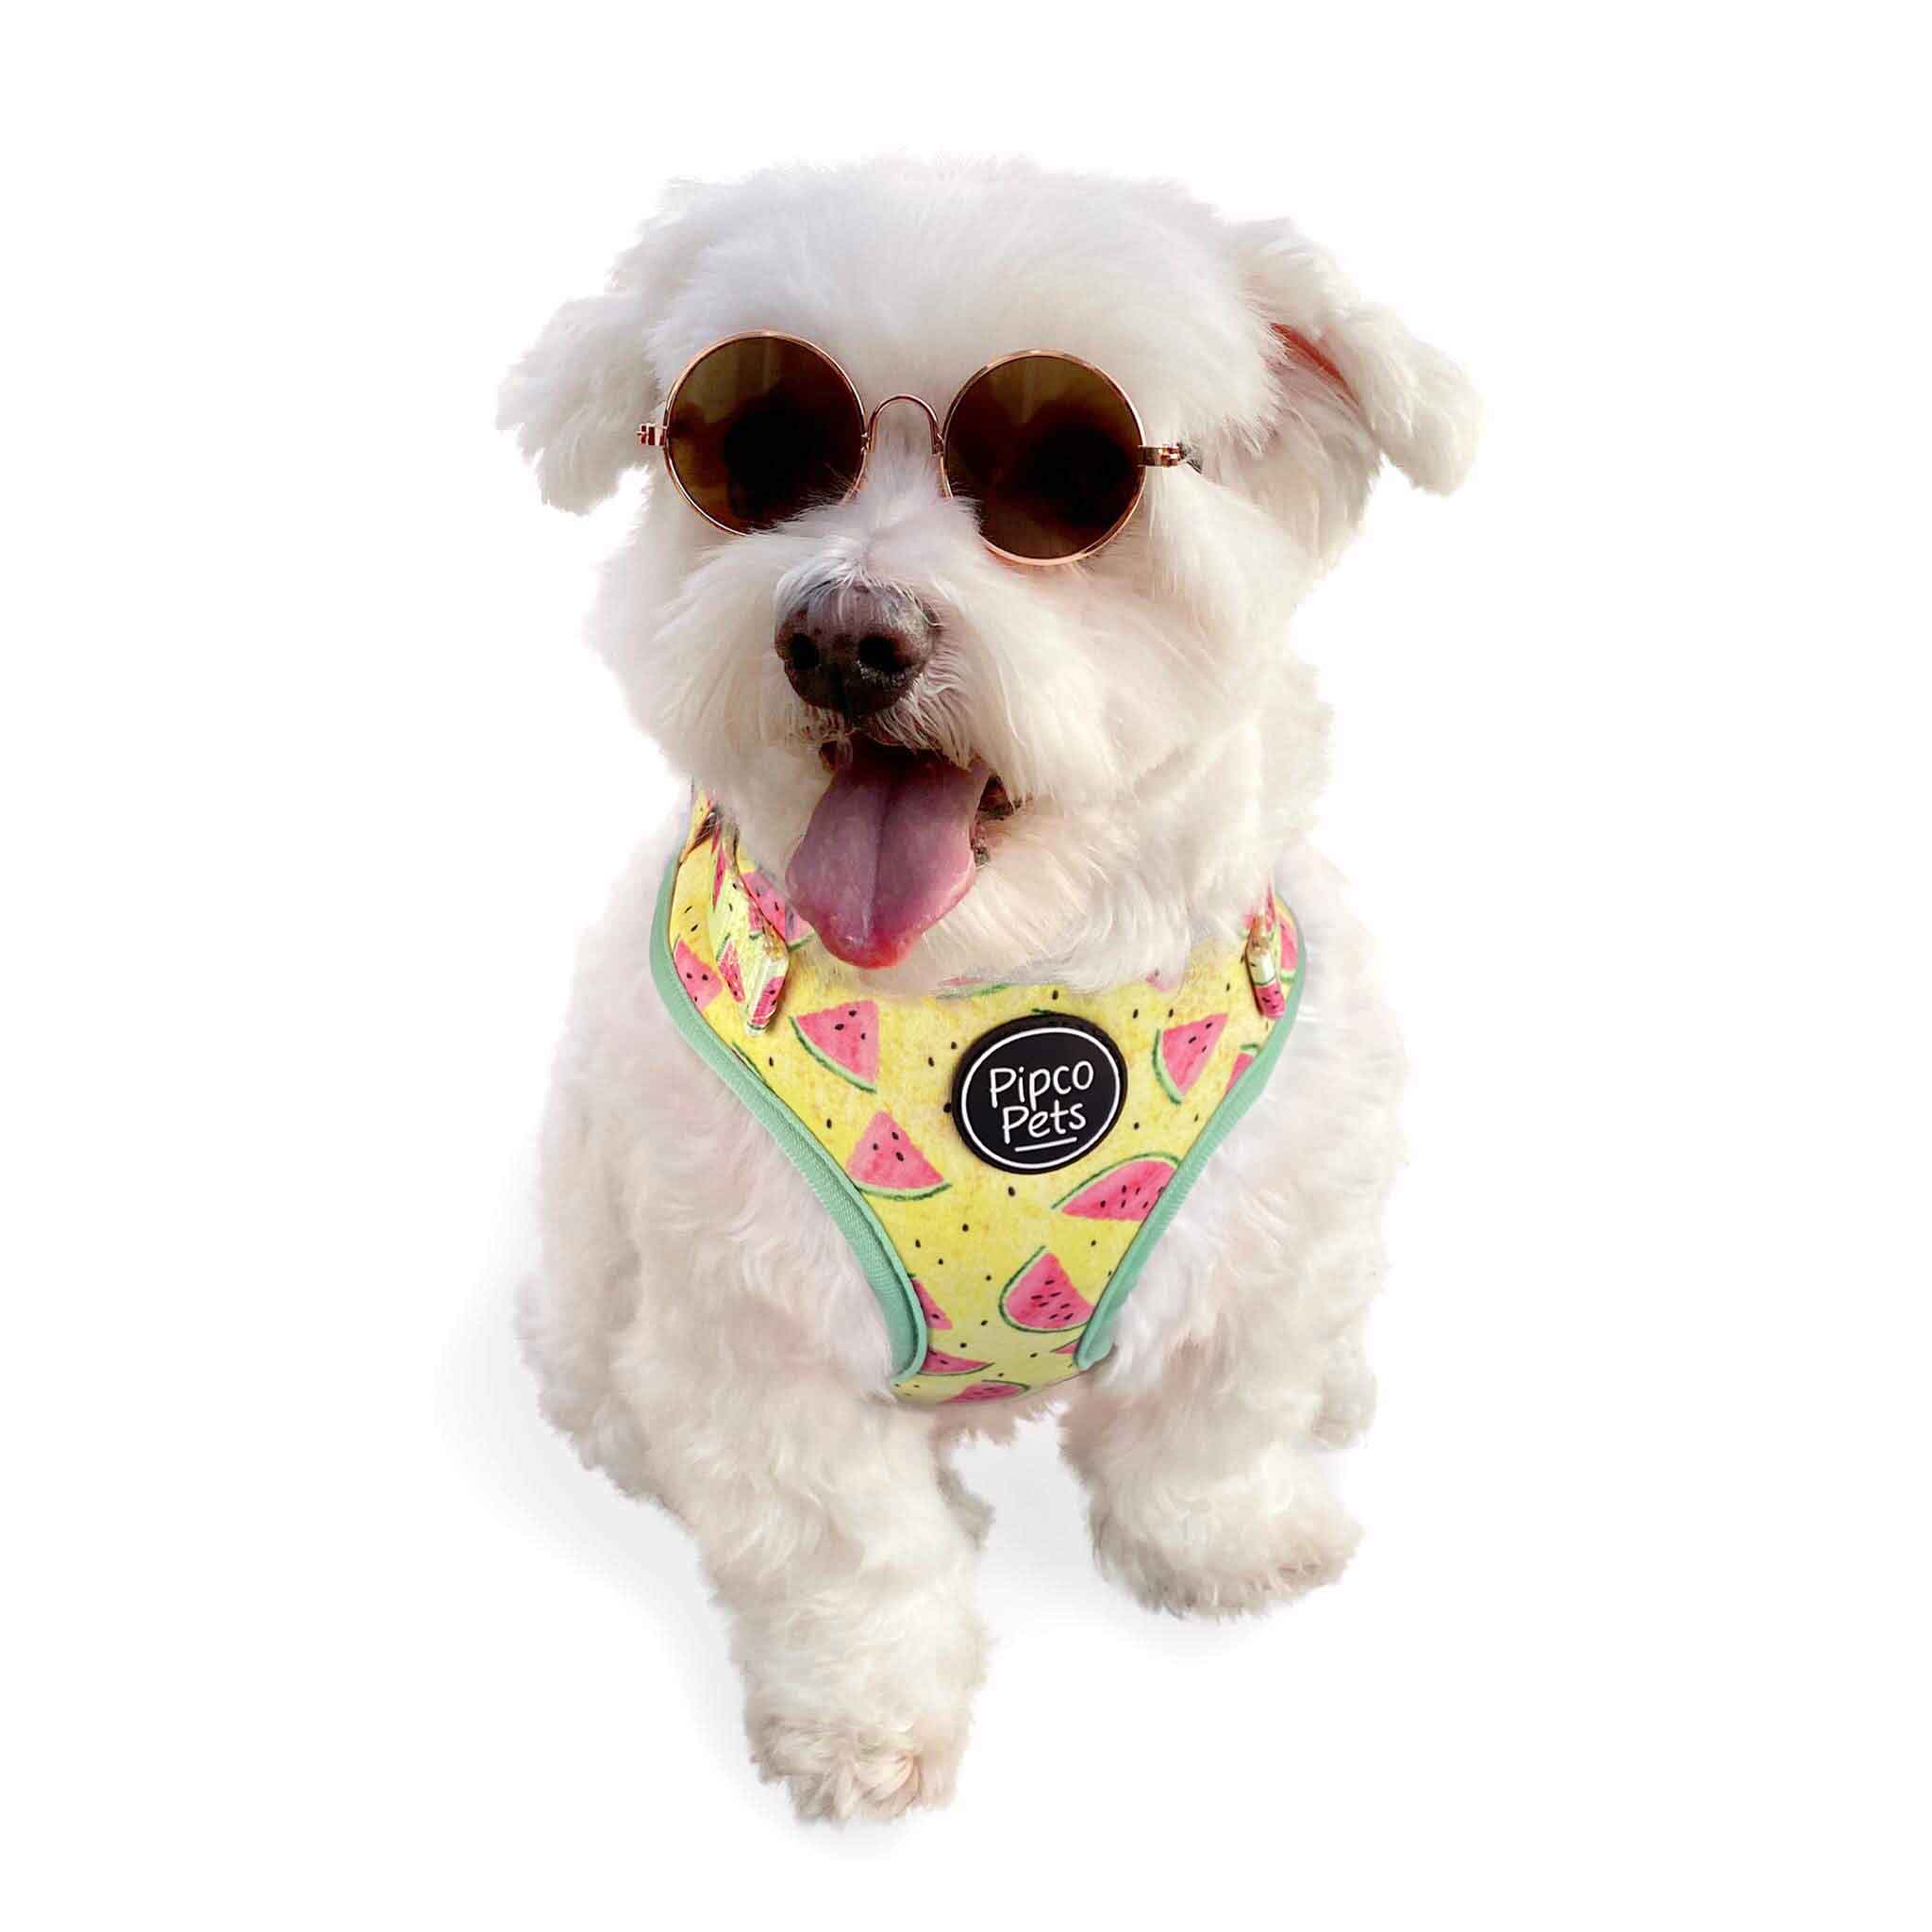 Cute dog wearing sunglasses and Pipco Pets adjustable dog harness with Summer Melons watermelon print pattern in yellow